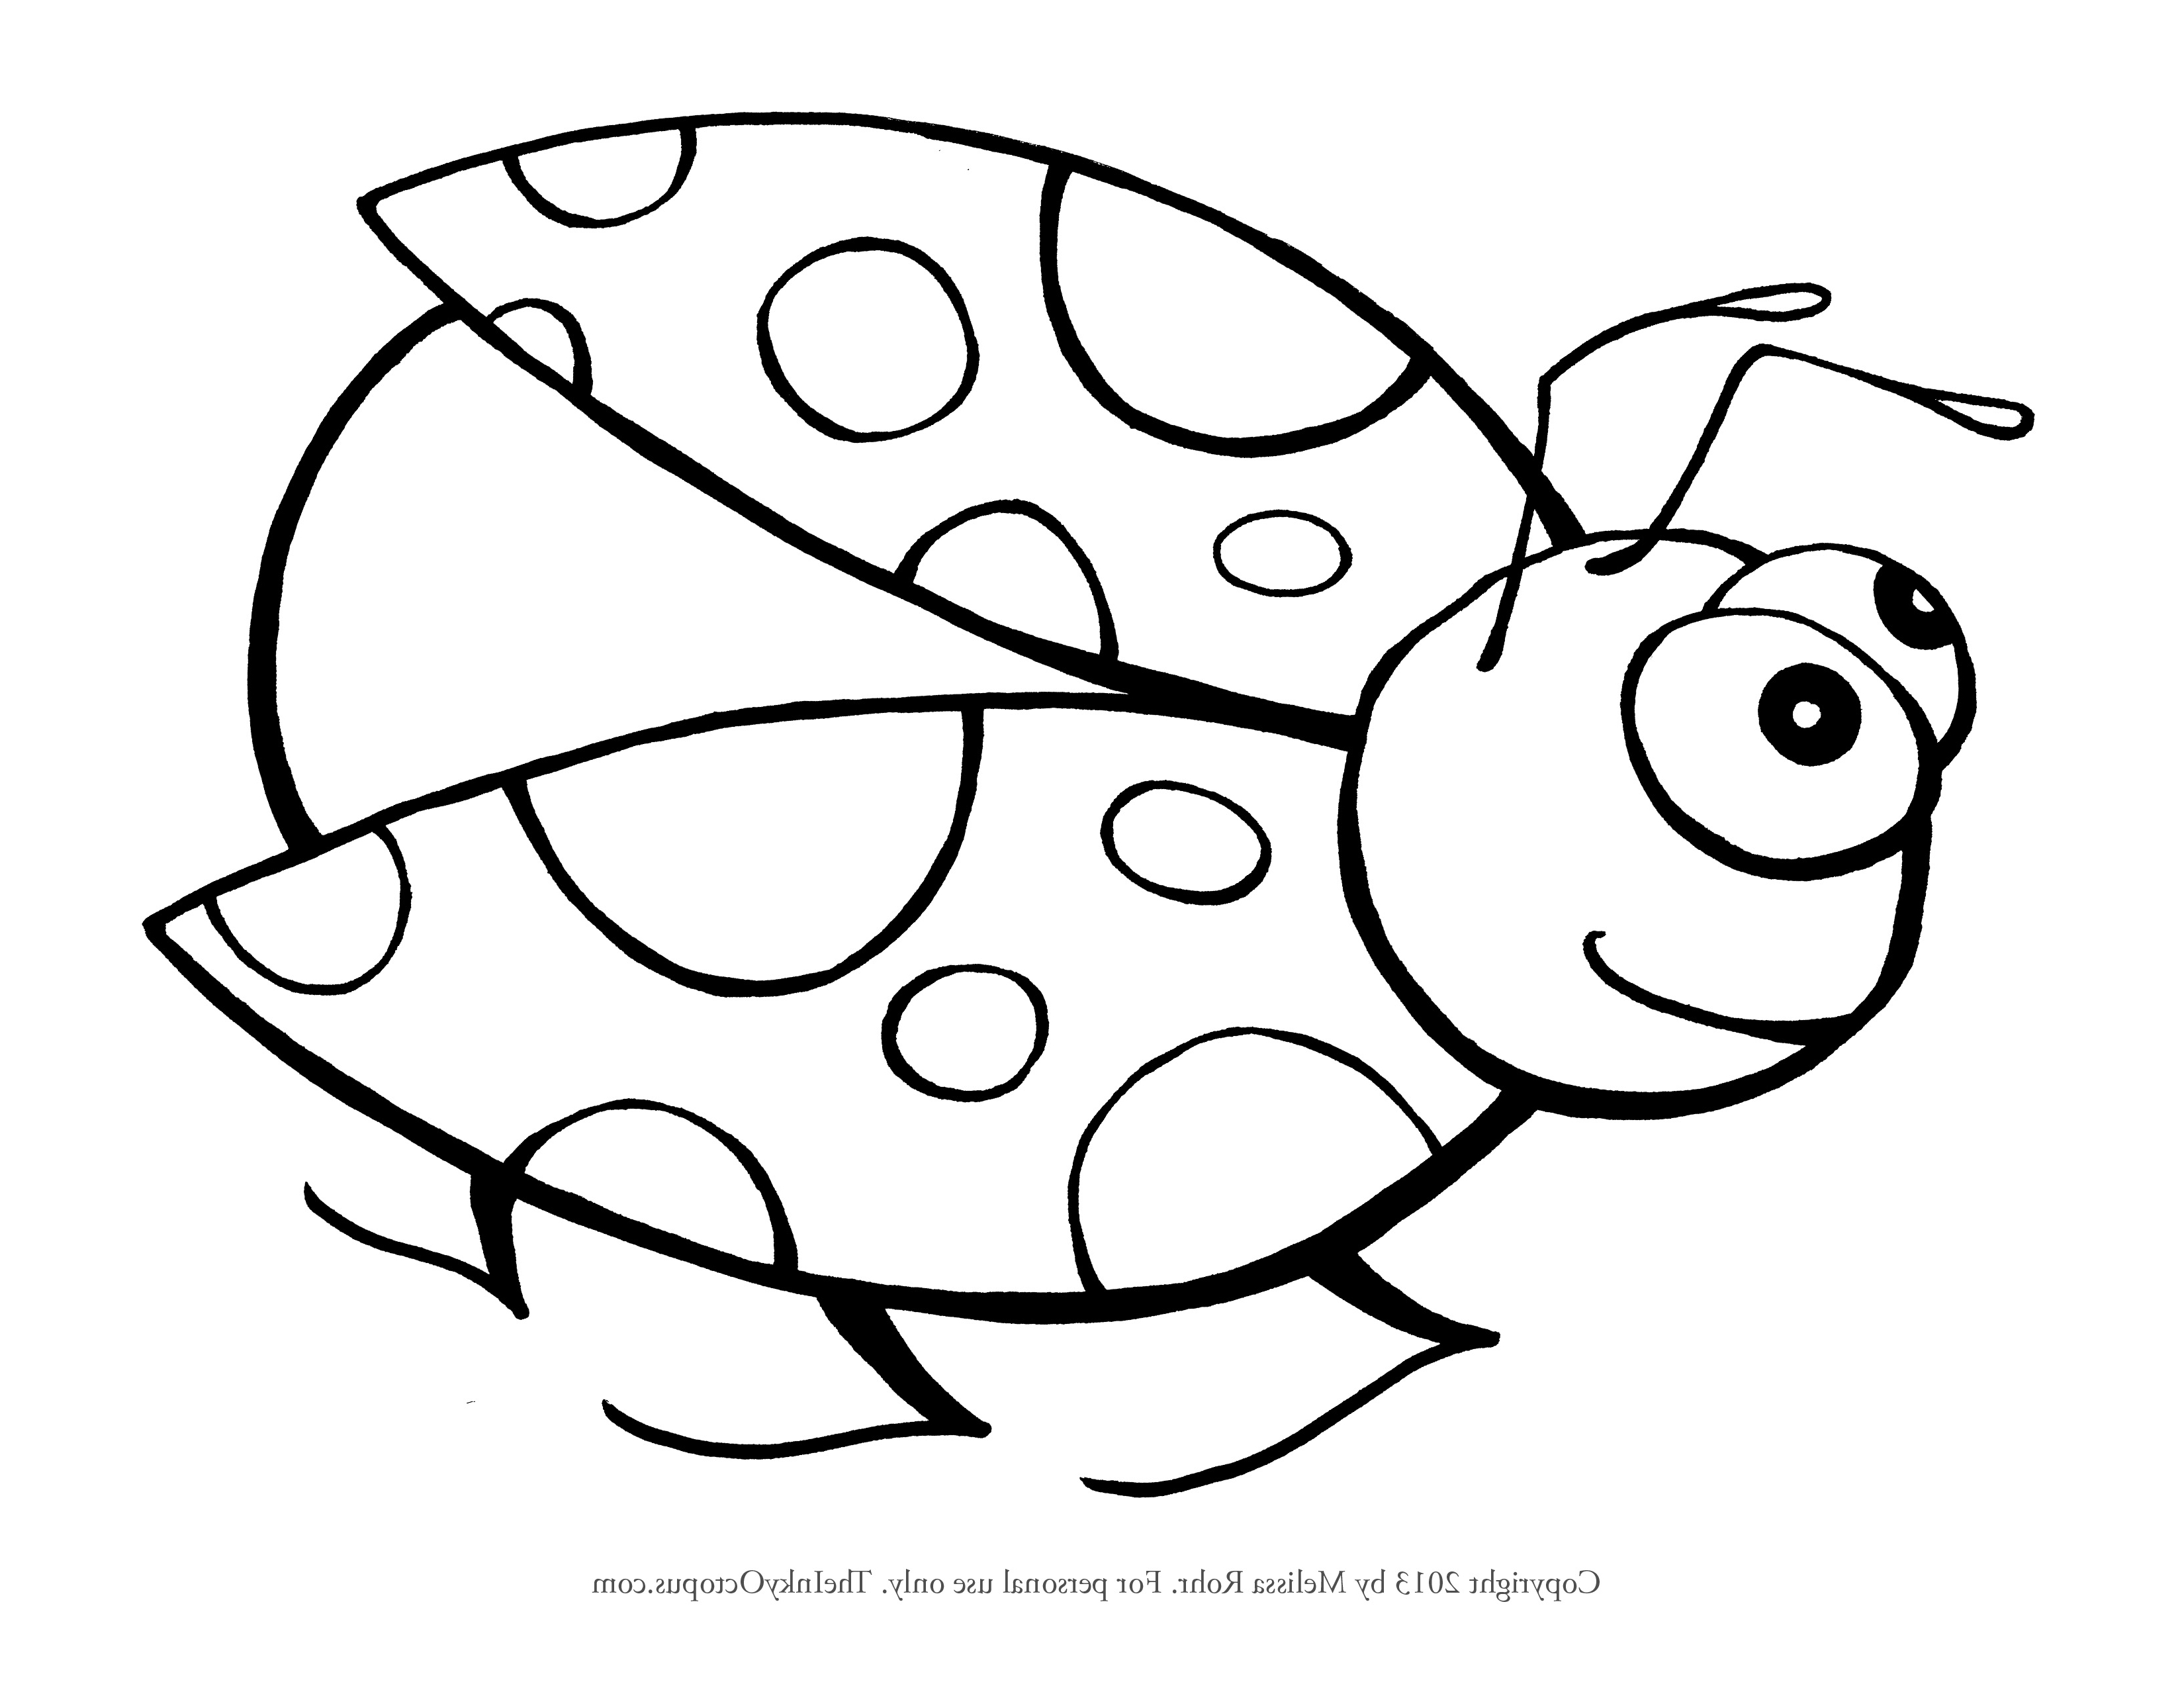 Ladybird Colouring Pages at GetColoringscom Free